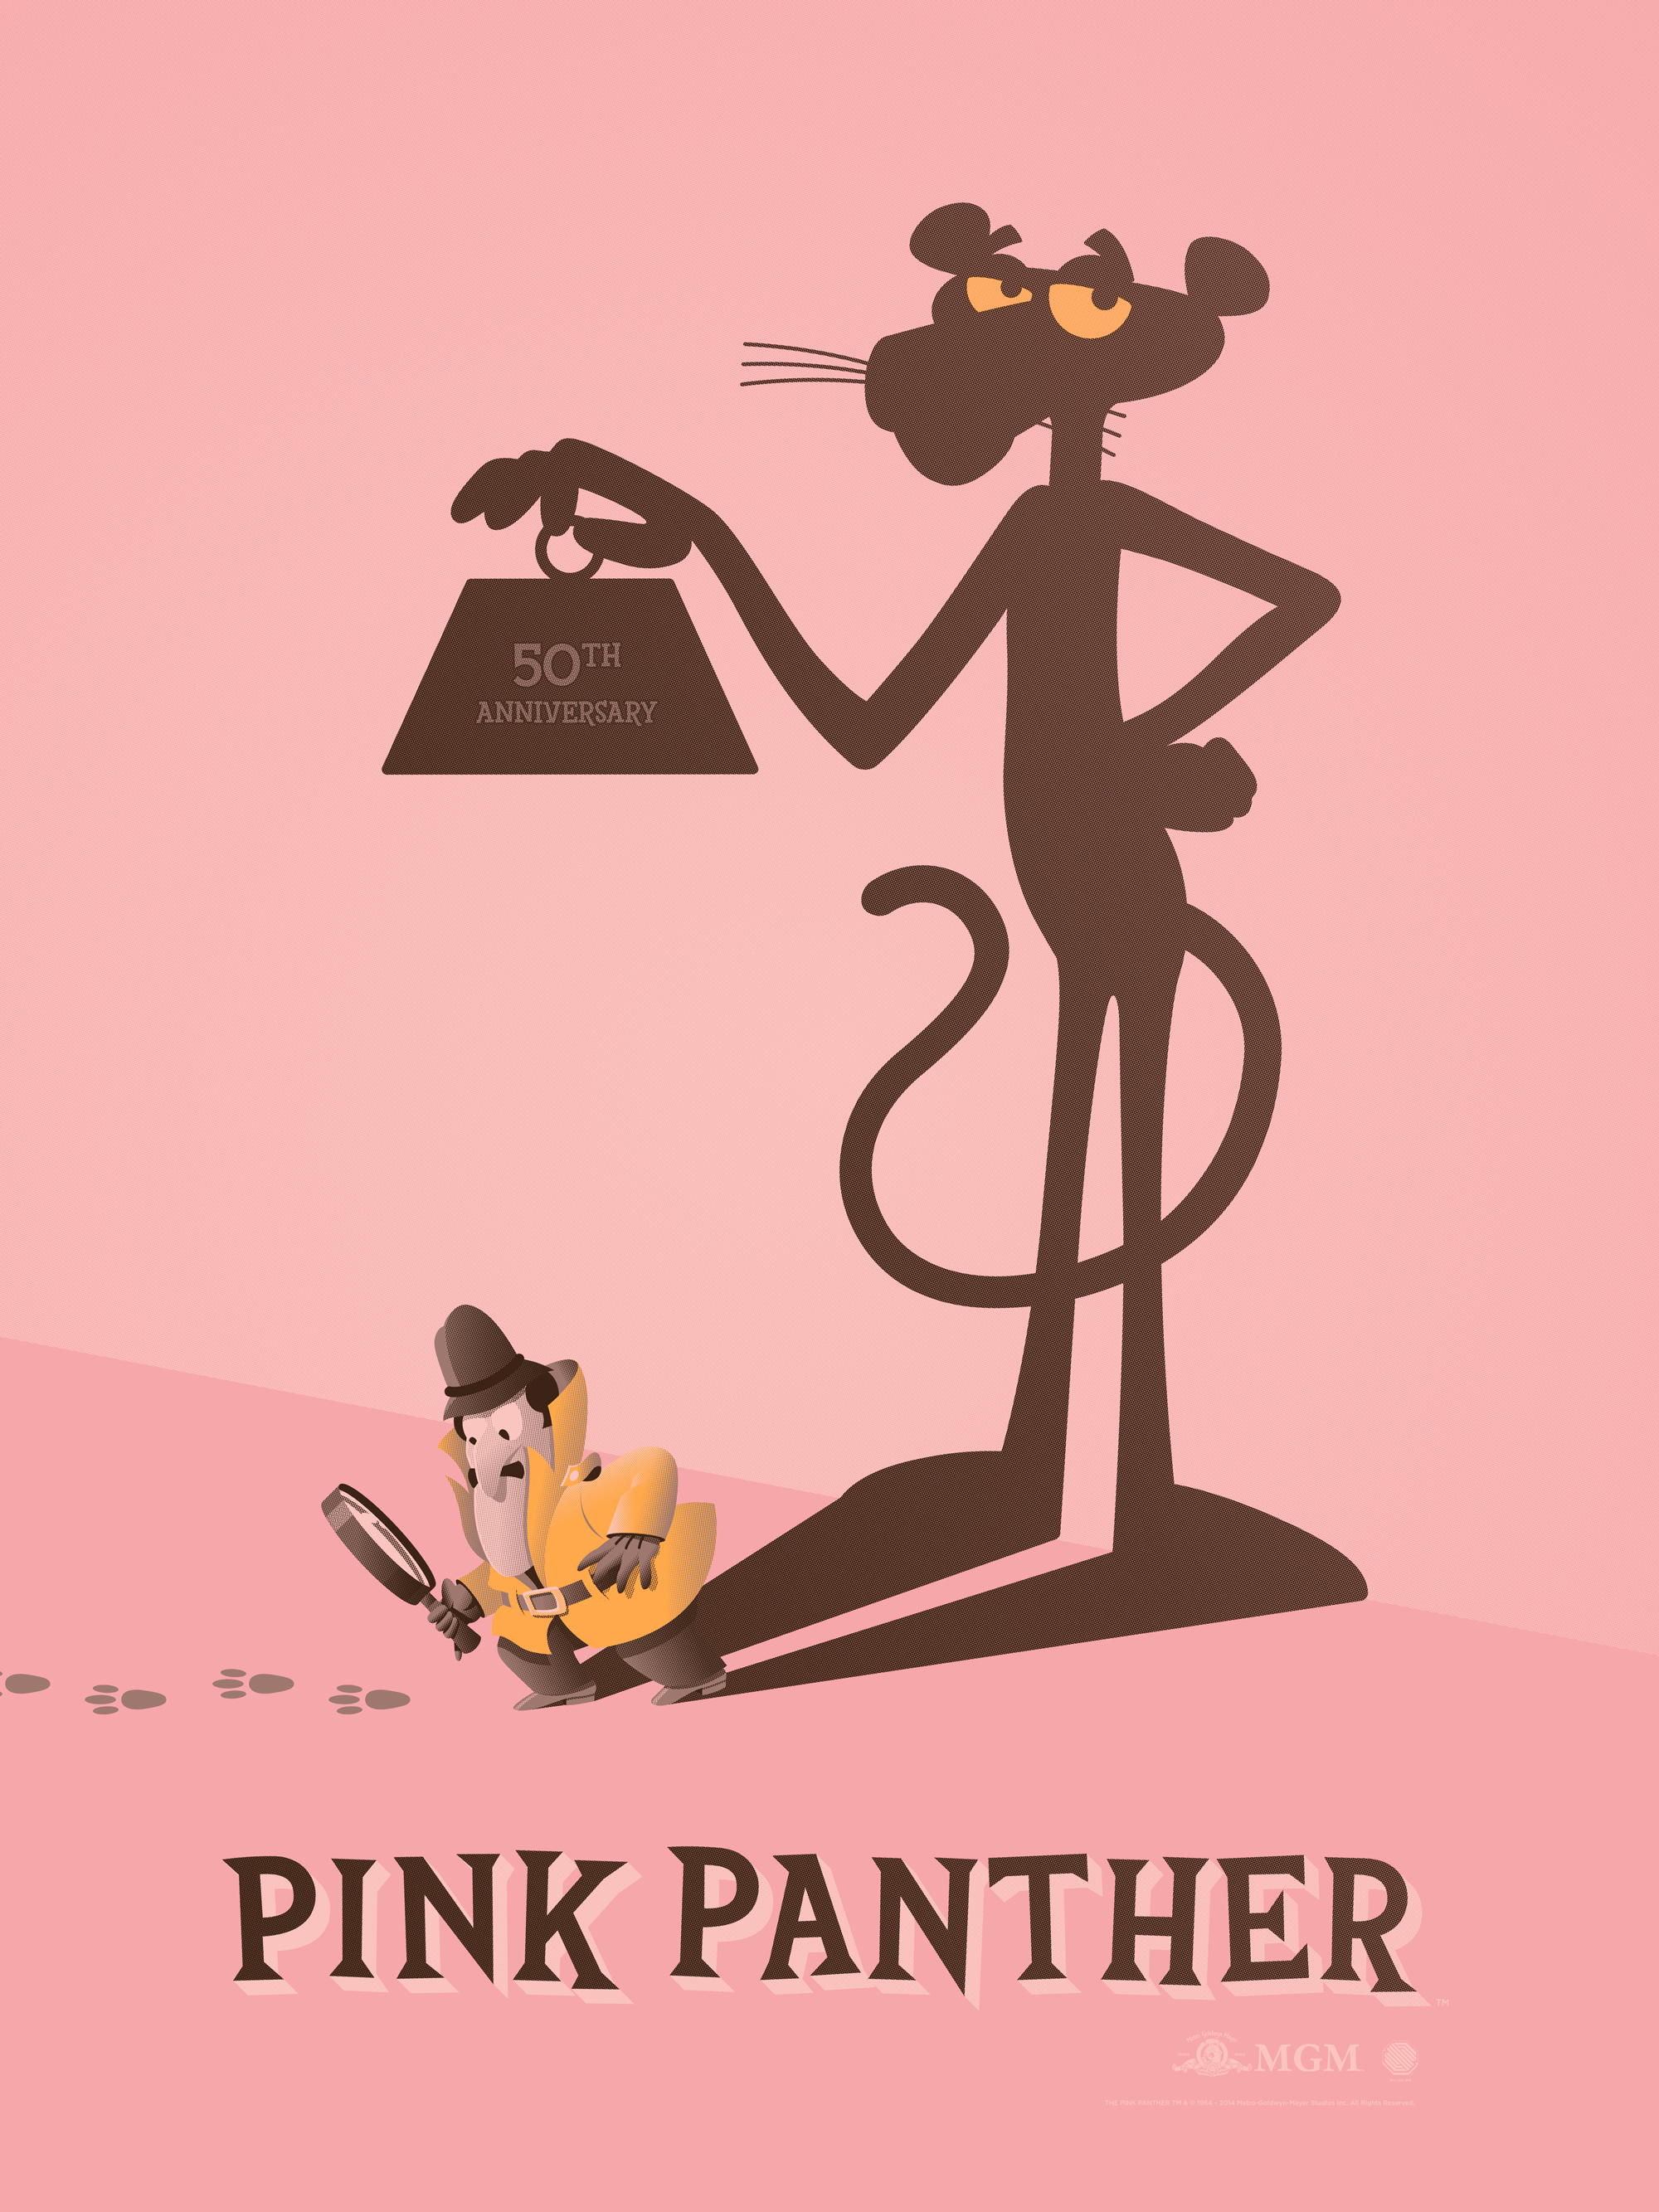 The Pink Panther 50th Anniversary Movie Poster — DKNG